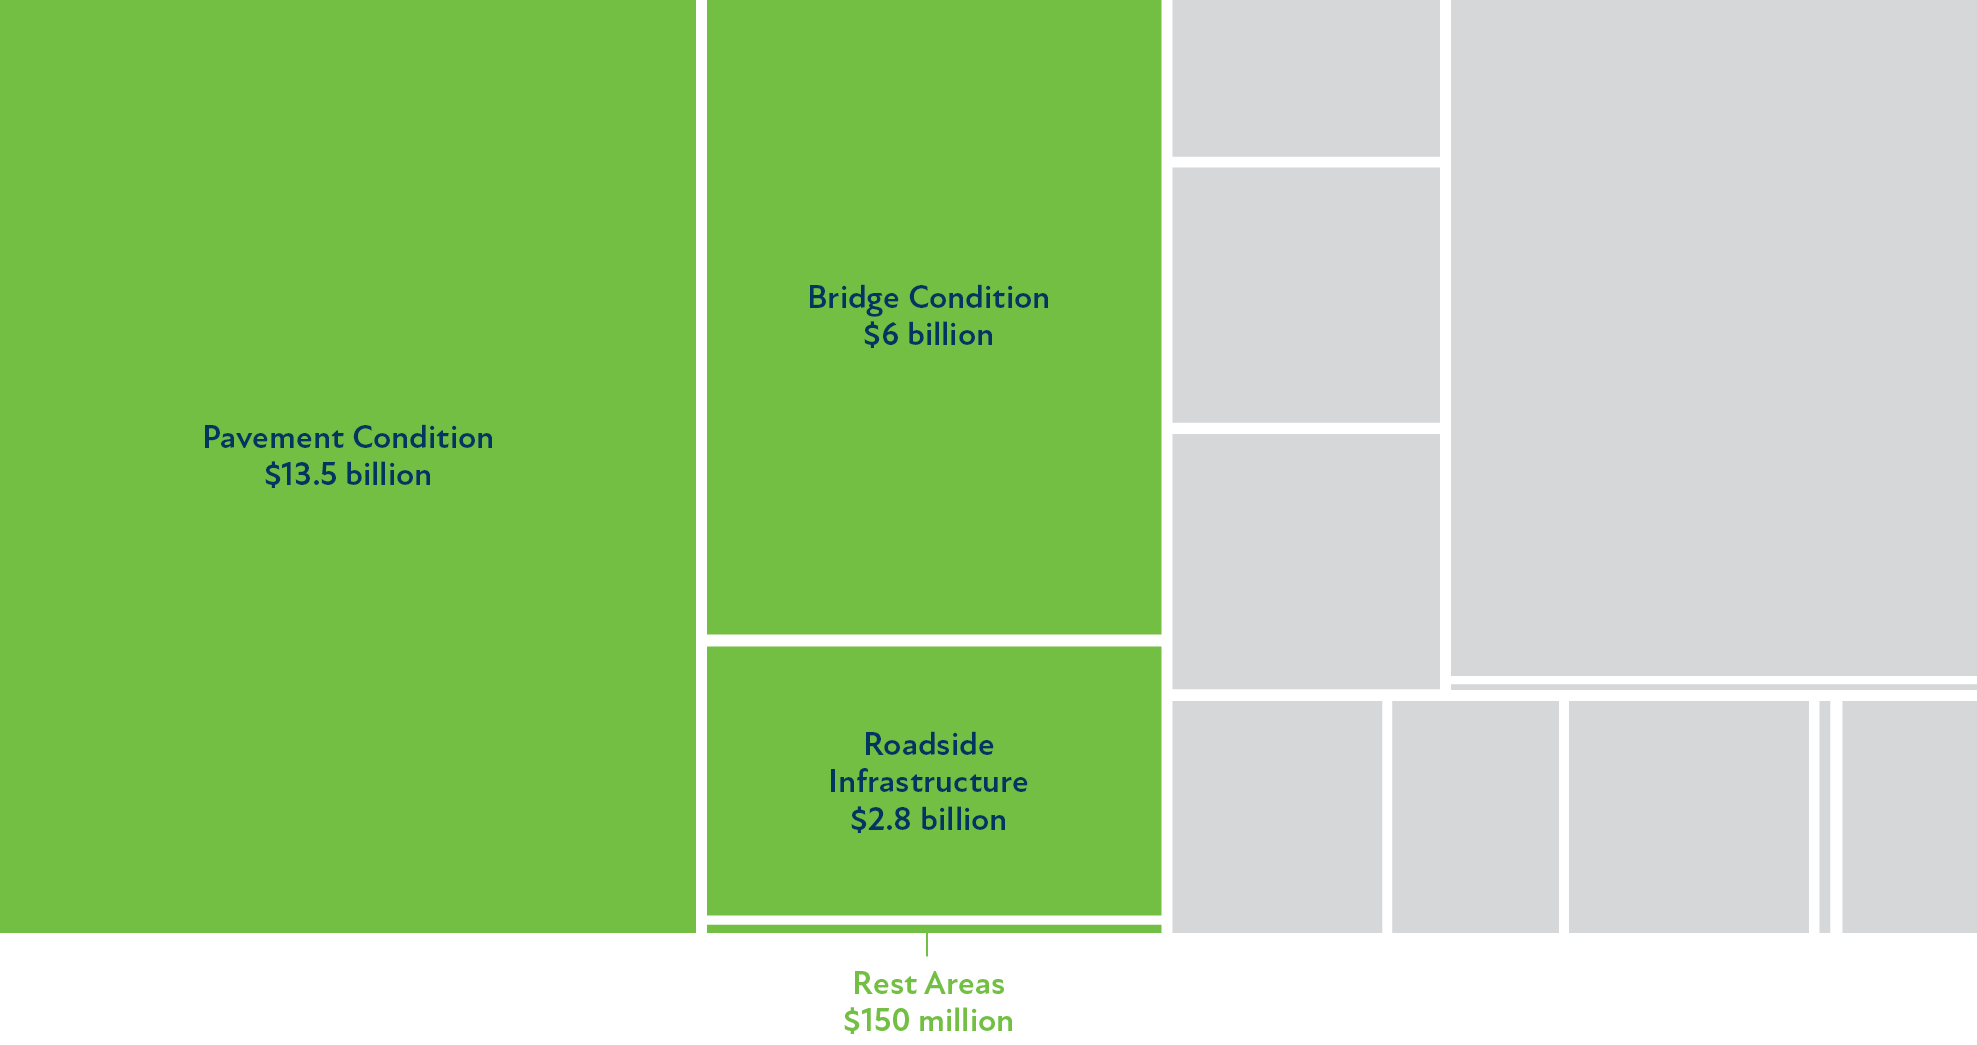 A color block chart showing the amount of investment going into the system stewardship categories. Pavement Condition ($13.5B), Bridge condition ($6B), Roadside infrastructure (2.8B), and rest areas ($150B) make up another more than half the investments. 